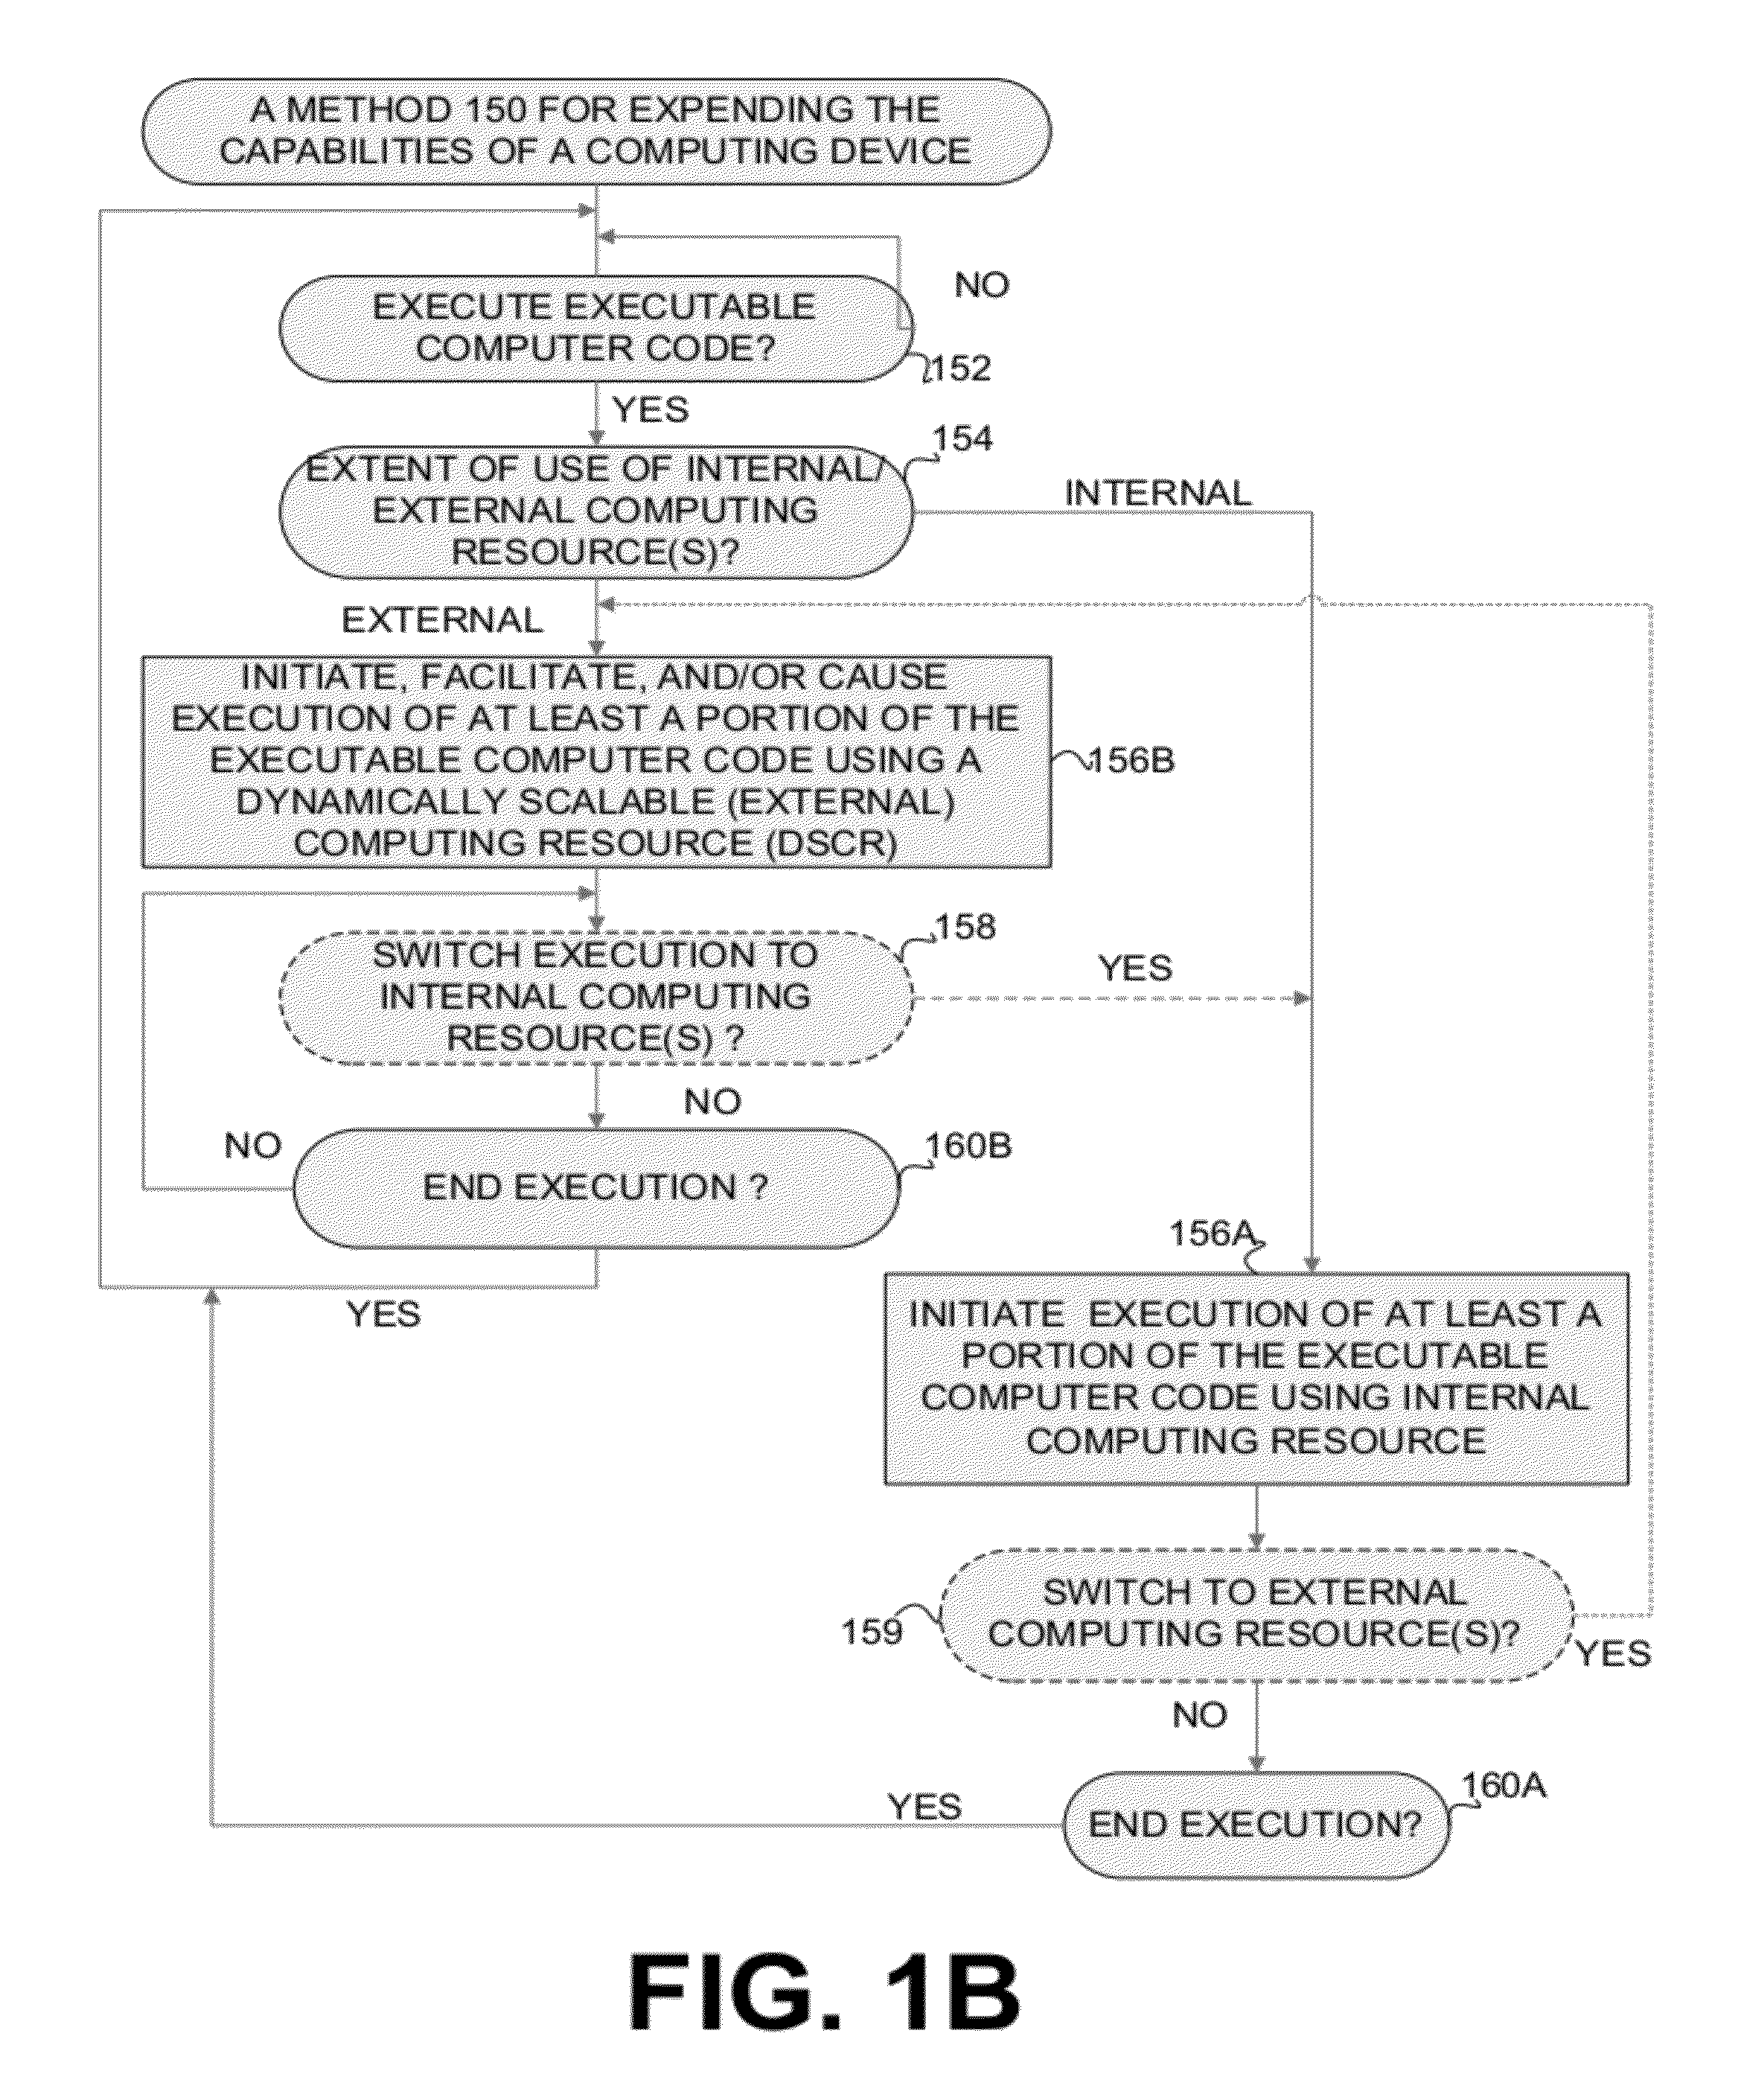 Execution allocation cost assessment for computing systems and environments including elastic computing systems and environments